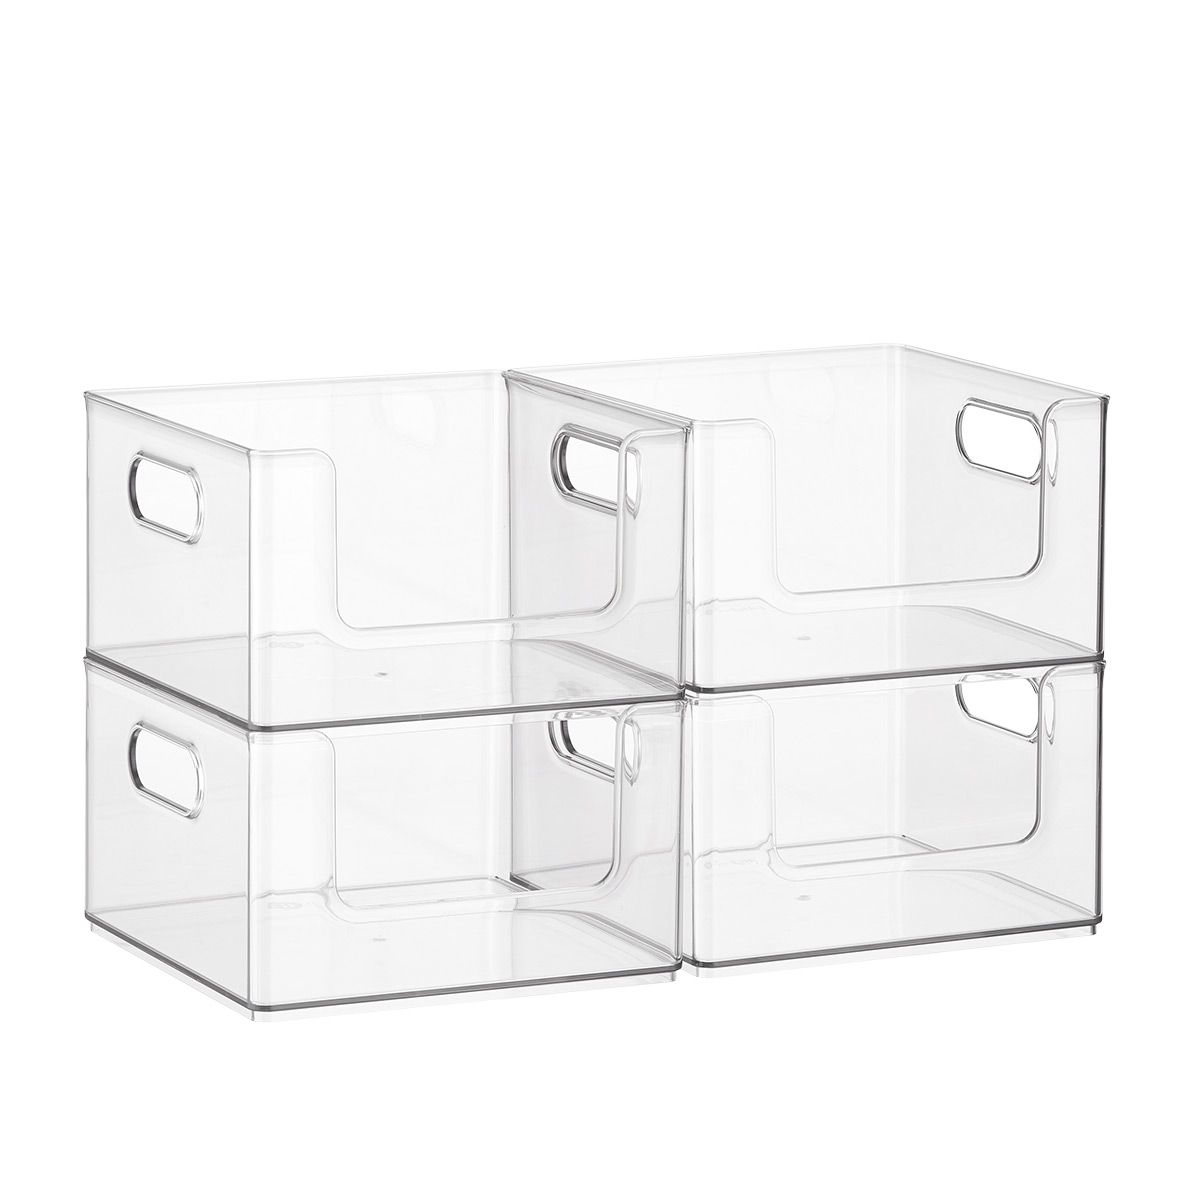 Case of 4 T.H.E. Stacking Pantry Bin ClearSKU:100824814.022 Reviews | The Container Store